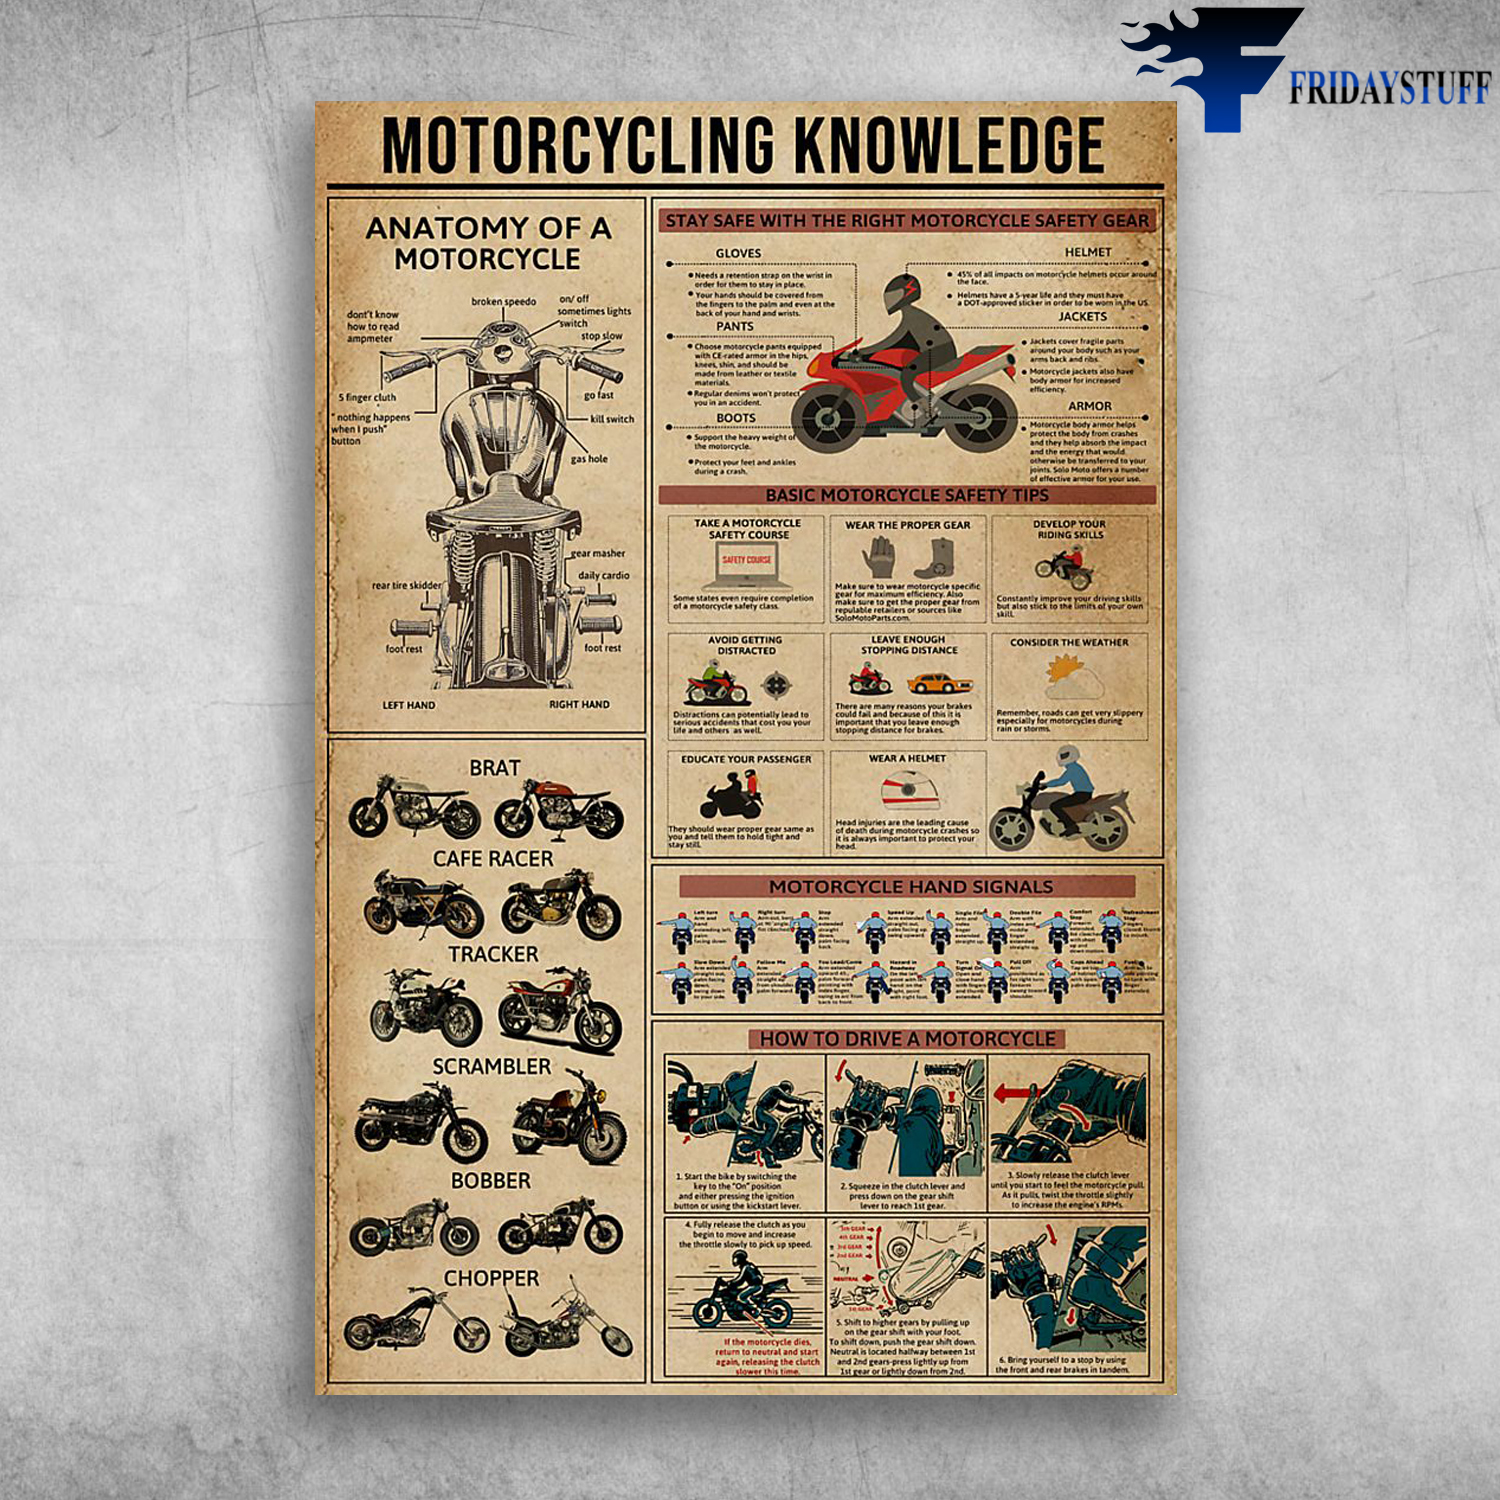 Motorcycling Knowledge Anatomy Of A Motorcycle